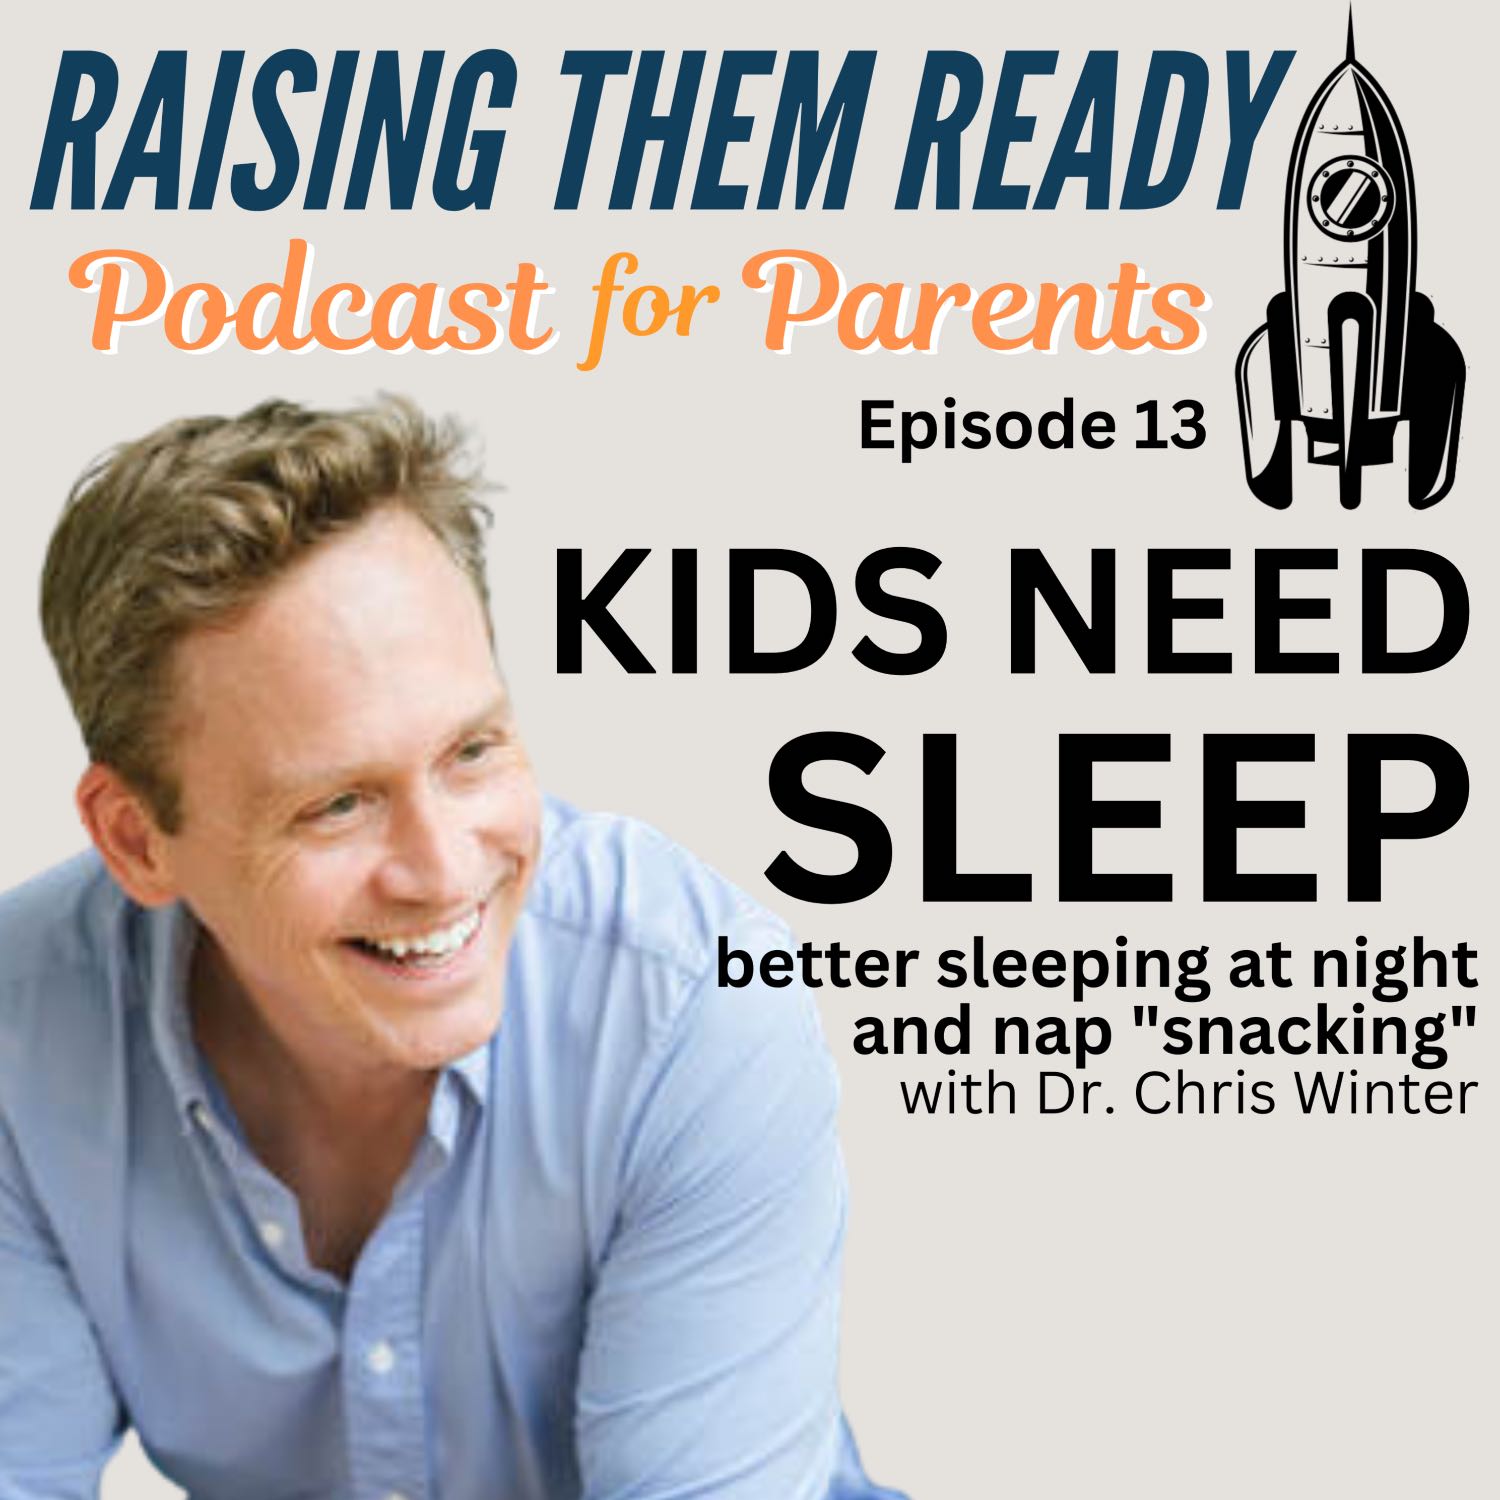 Kids Need Sleep - better sleeping at night and nap "snacking", with guest Dr. Chris Winter